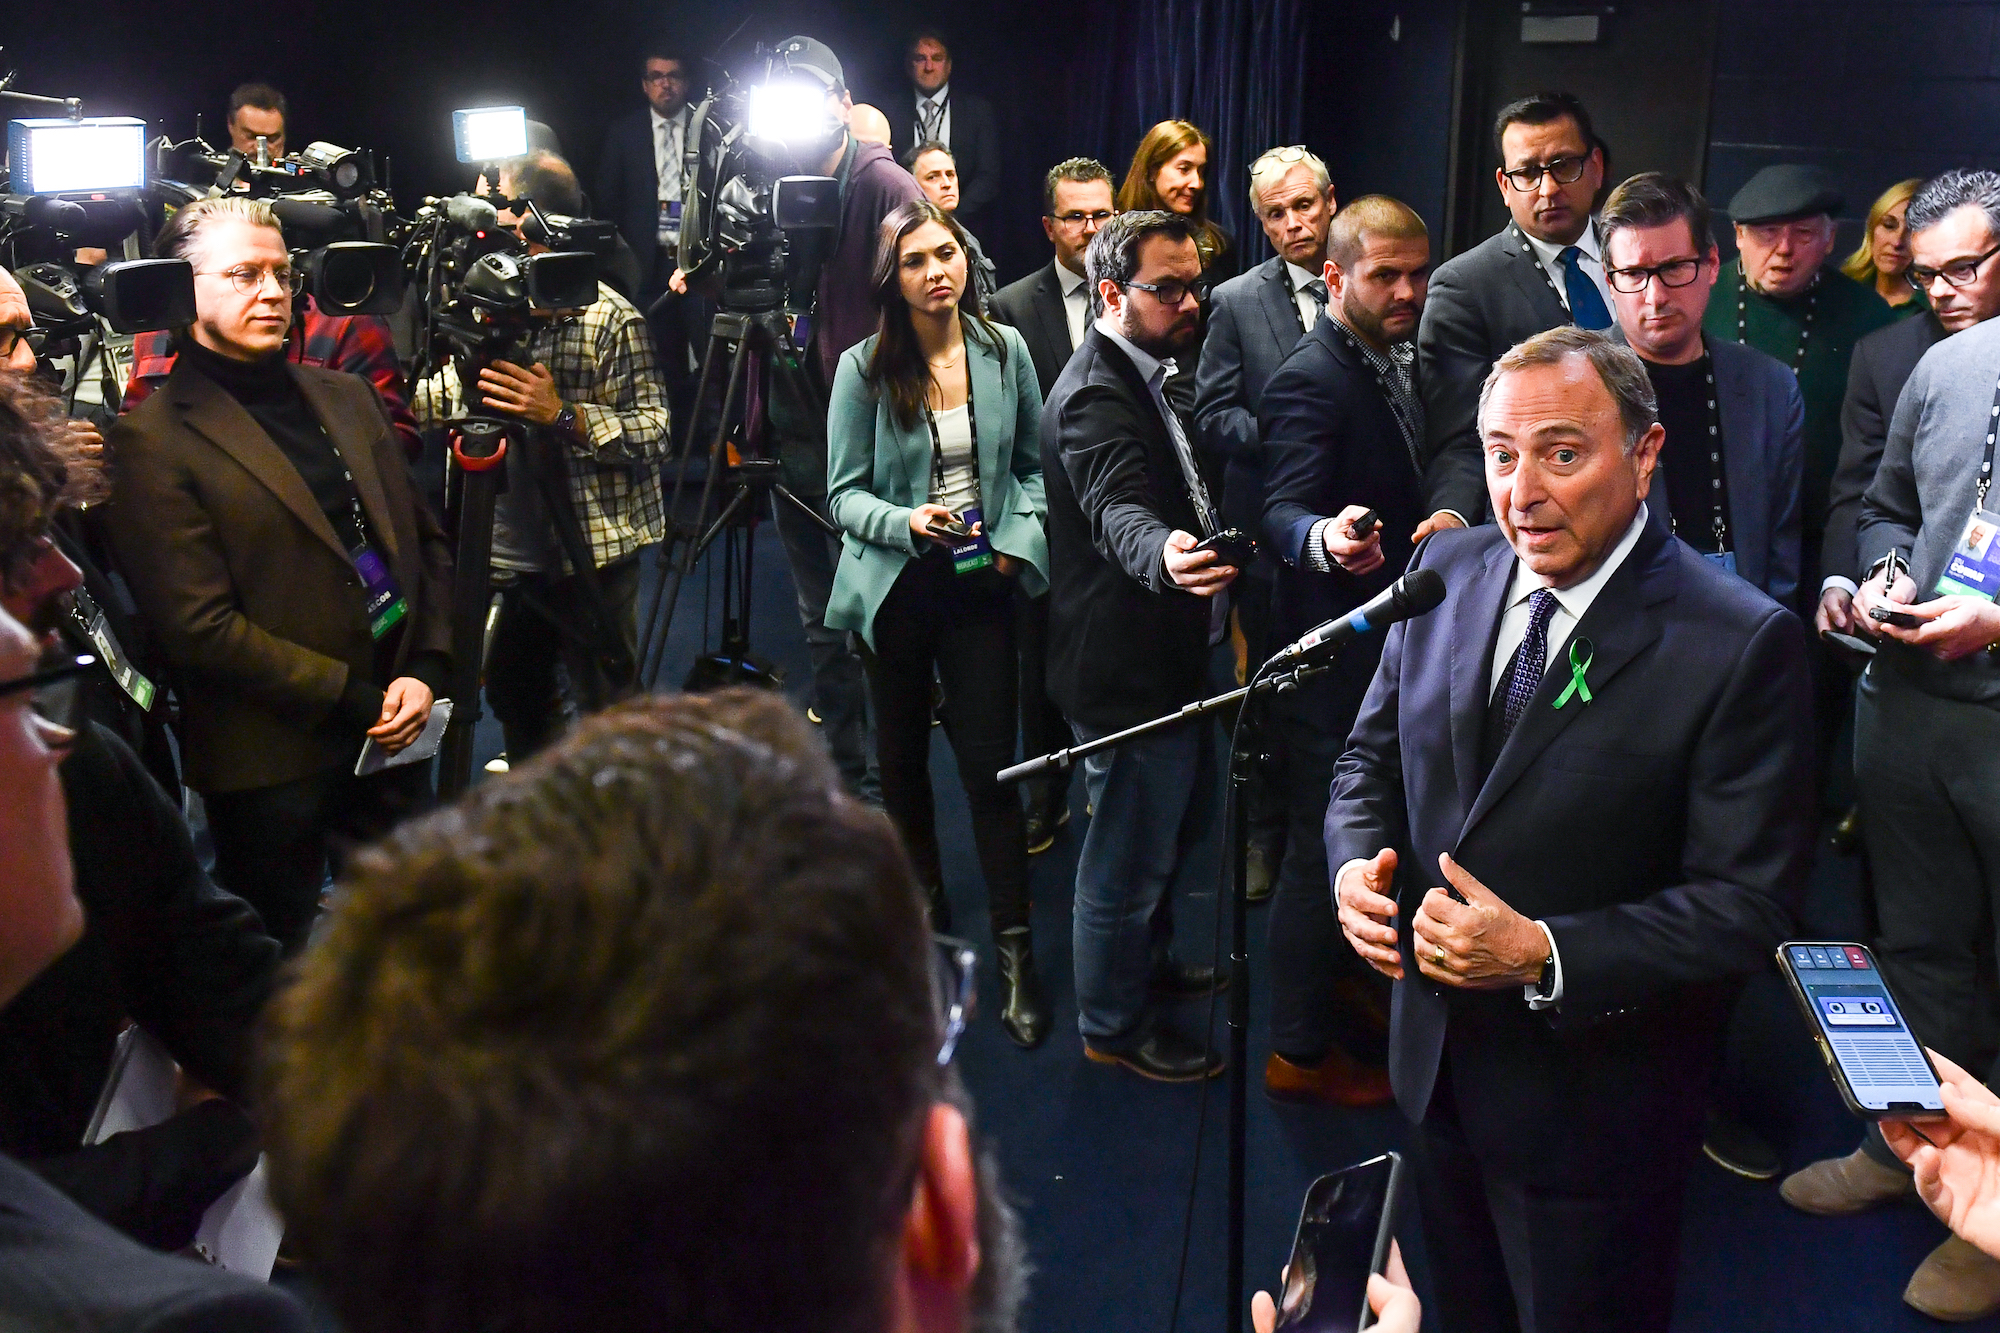 MONTREAL, CANADA - JANUARY 24: NHL commissioner Gary Bettman addresses the media prior to the game between the Montreal Canadiens and the Boston Bruins at Centre Bell on January 24, 2023 in Montreal, Quebec, Canada. The Boston Bruins defeated the Montreal Canadiens 4-2. (Photo by Minas Panagiotakis/Getty Images)